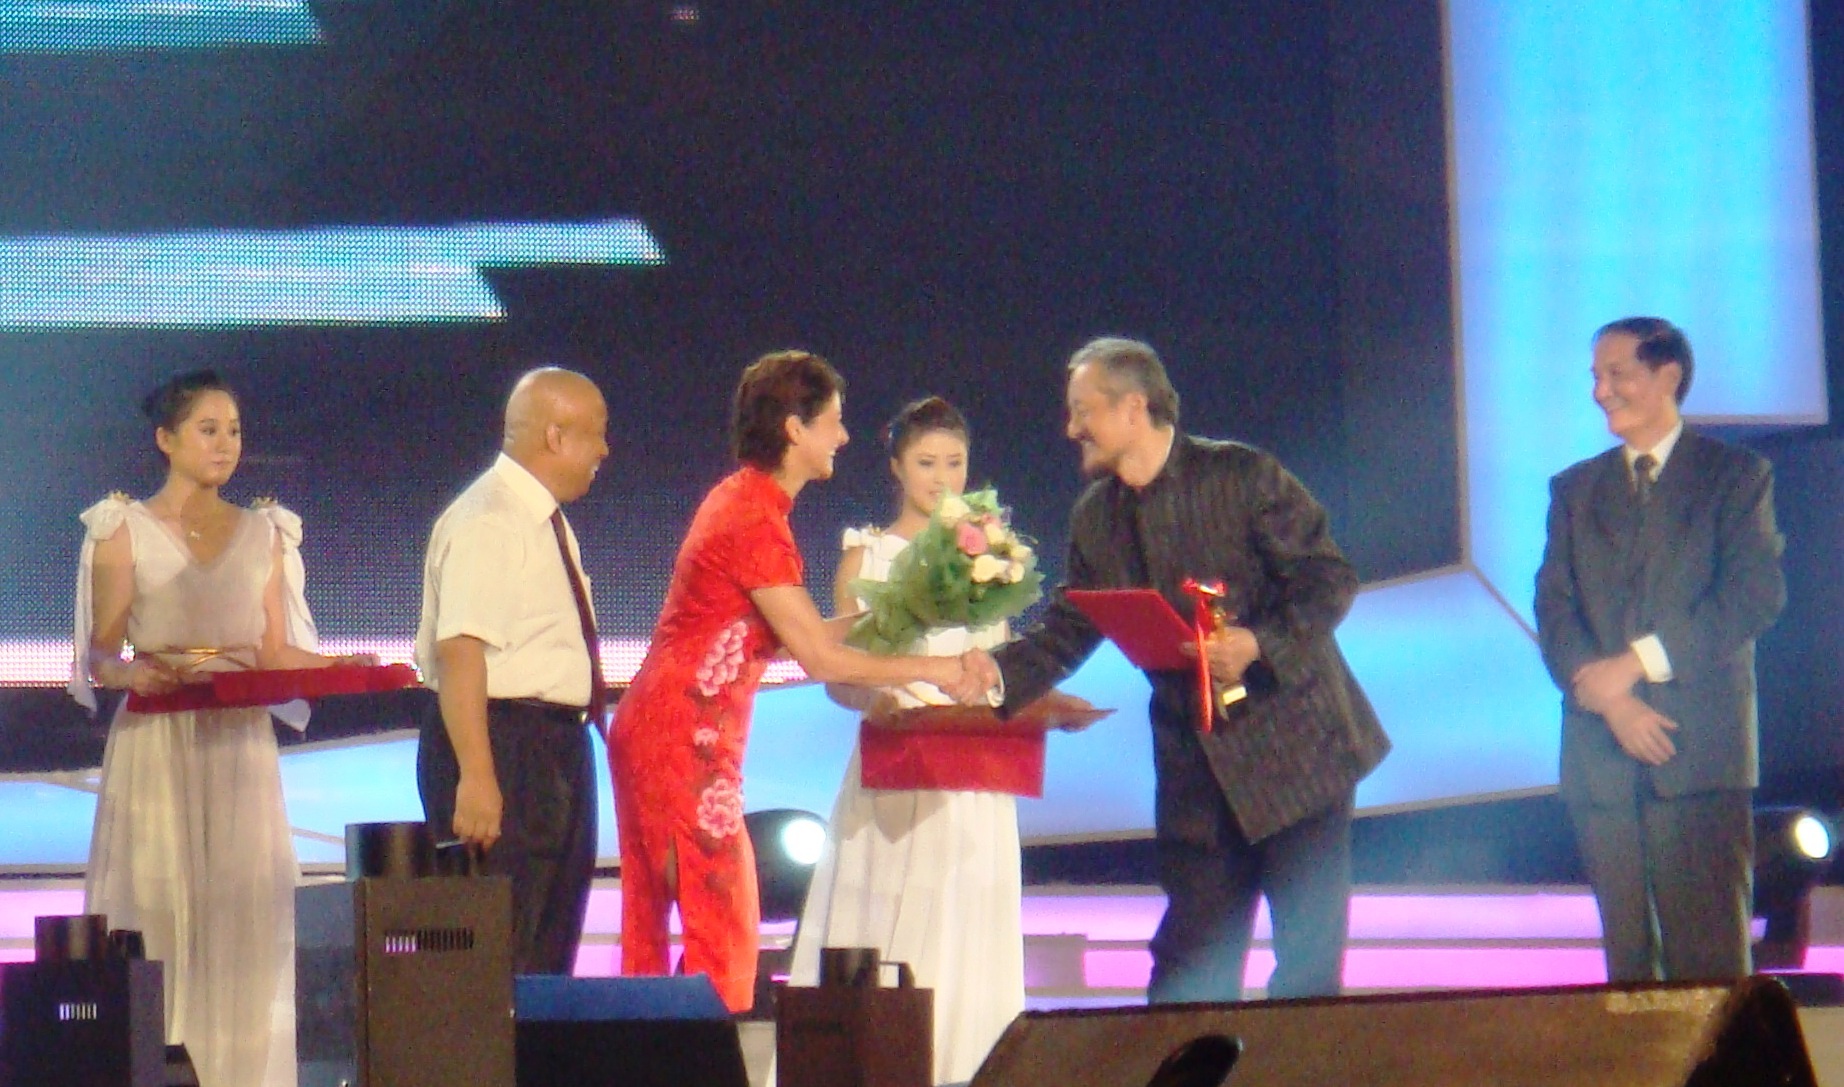 Changchun Film Festival 2008 presenting Best Director Award to Xu Geng for 'Heart of Ice'